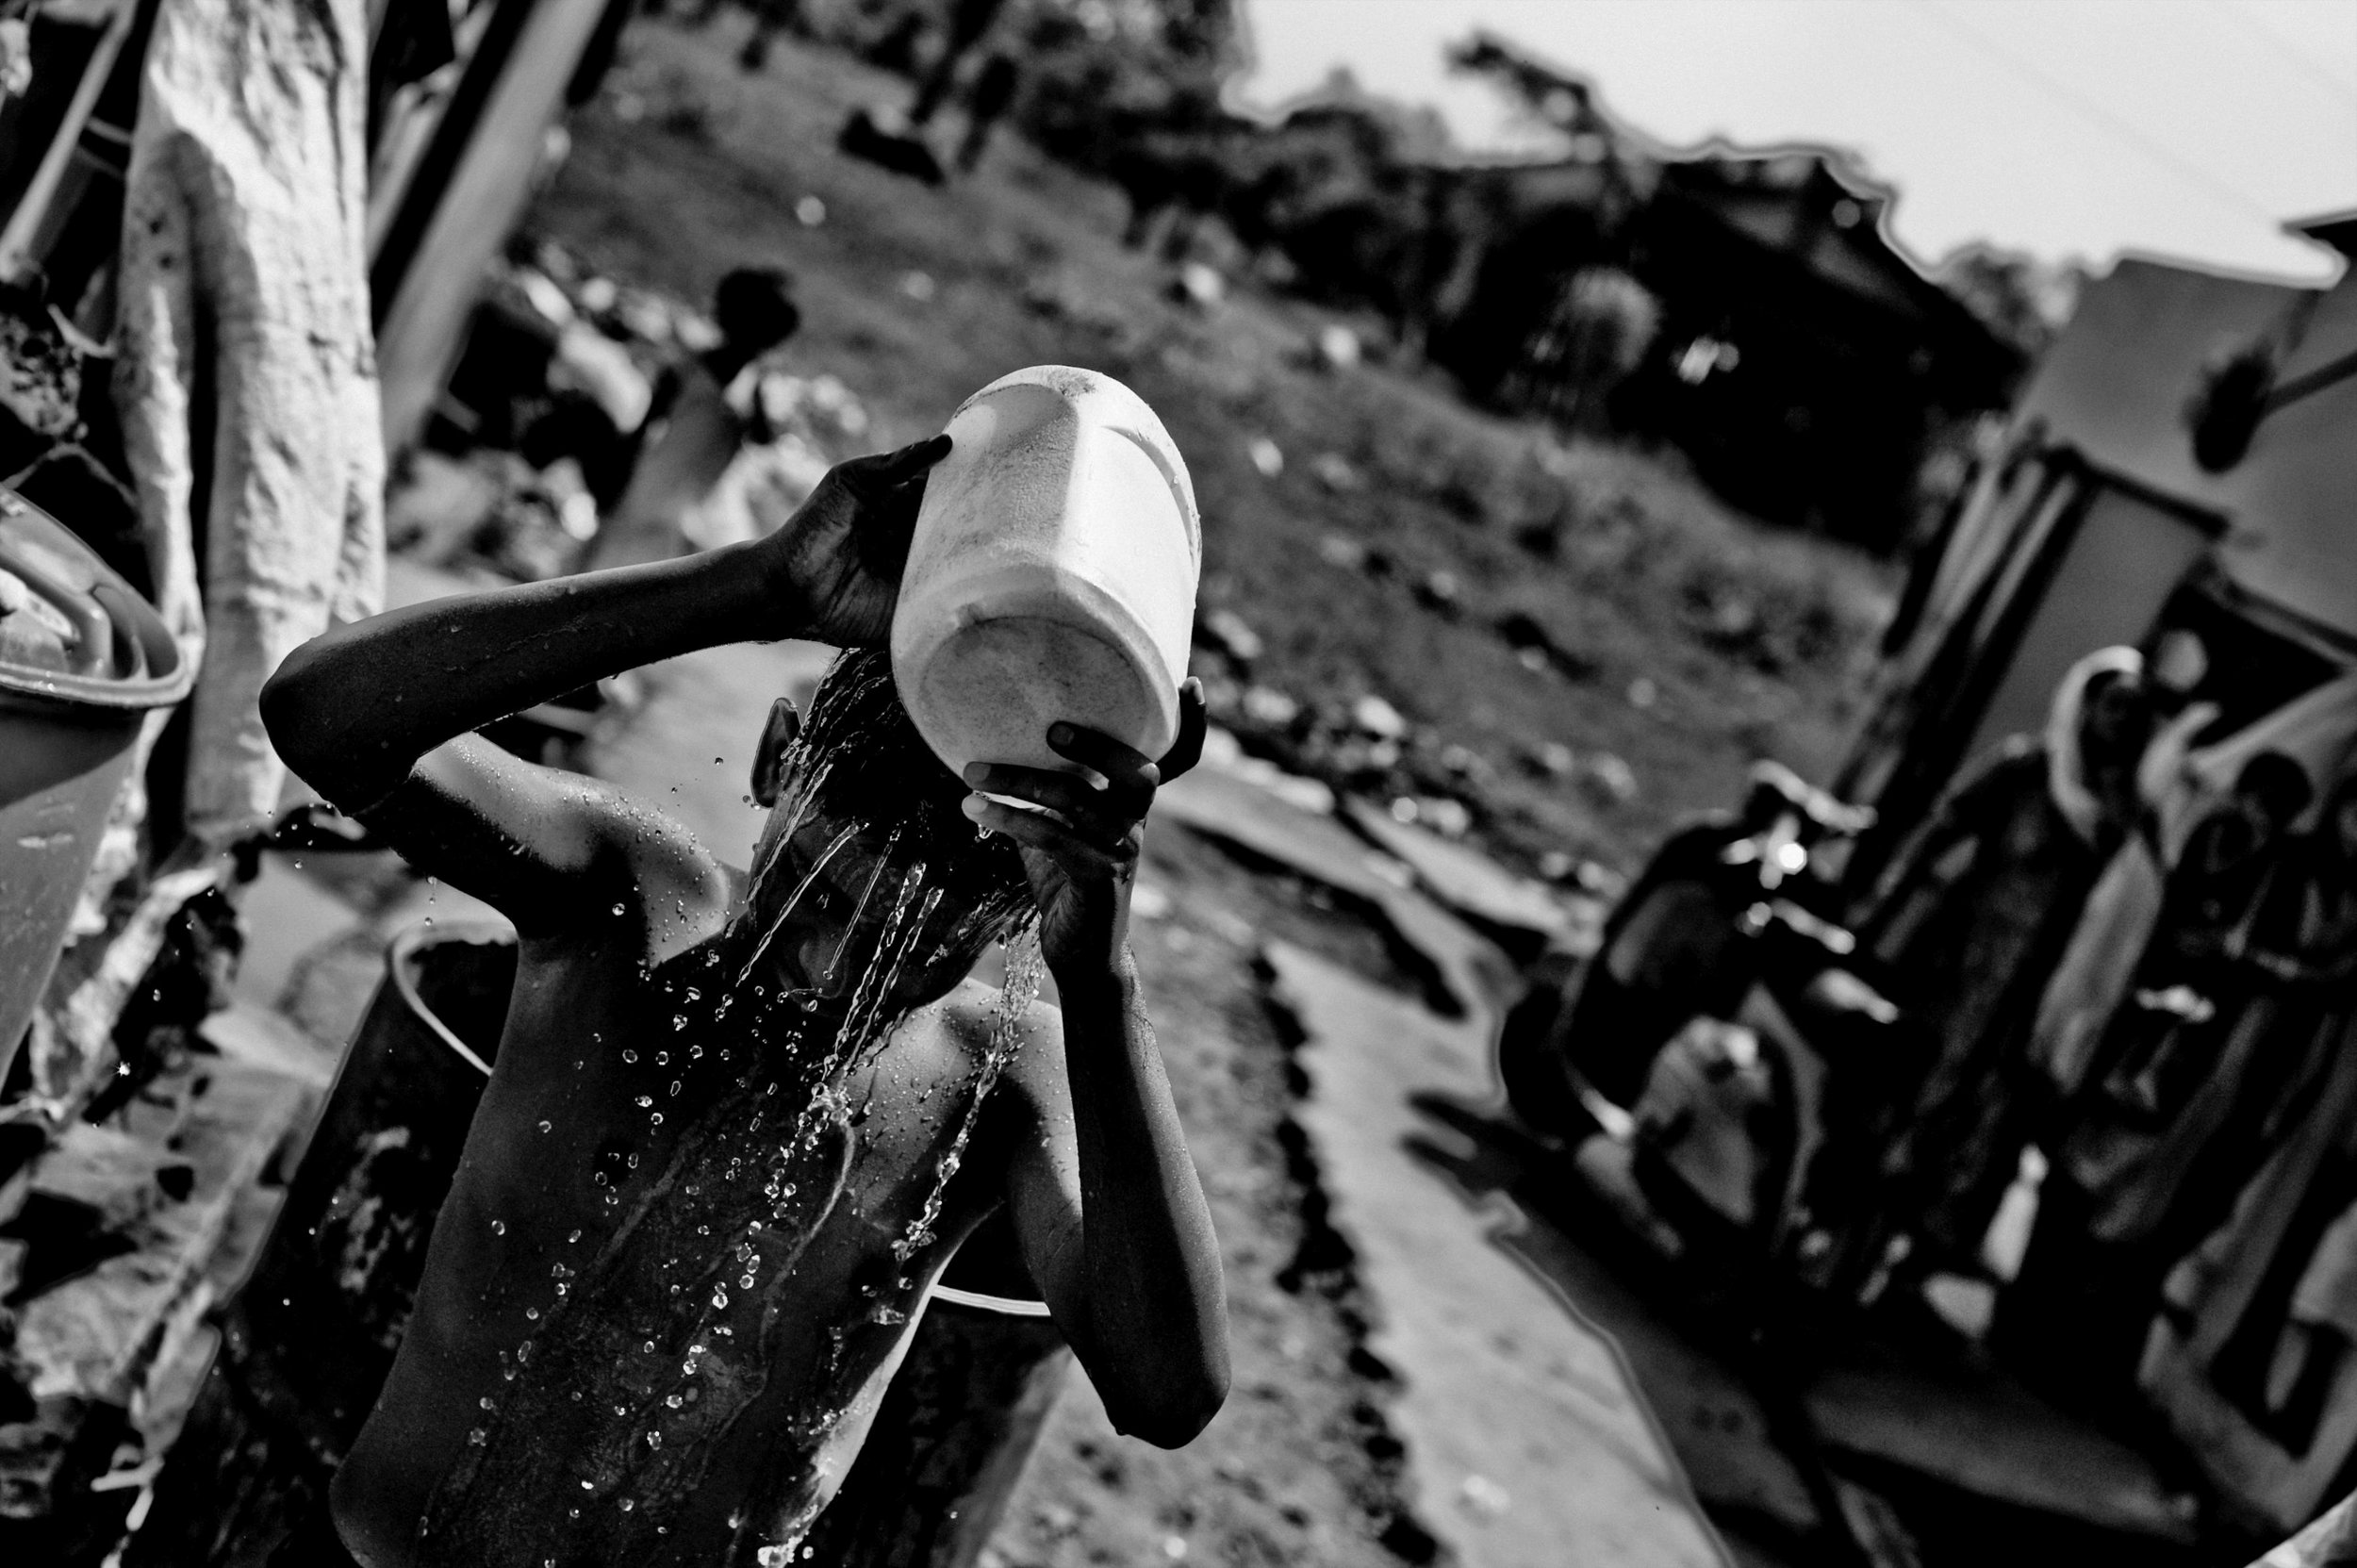  A boy bathes in front of the shack he lives on the site of the Union Carbide plant behind him in the city of Bhopal in the state Madhya Pradesh, India. 